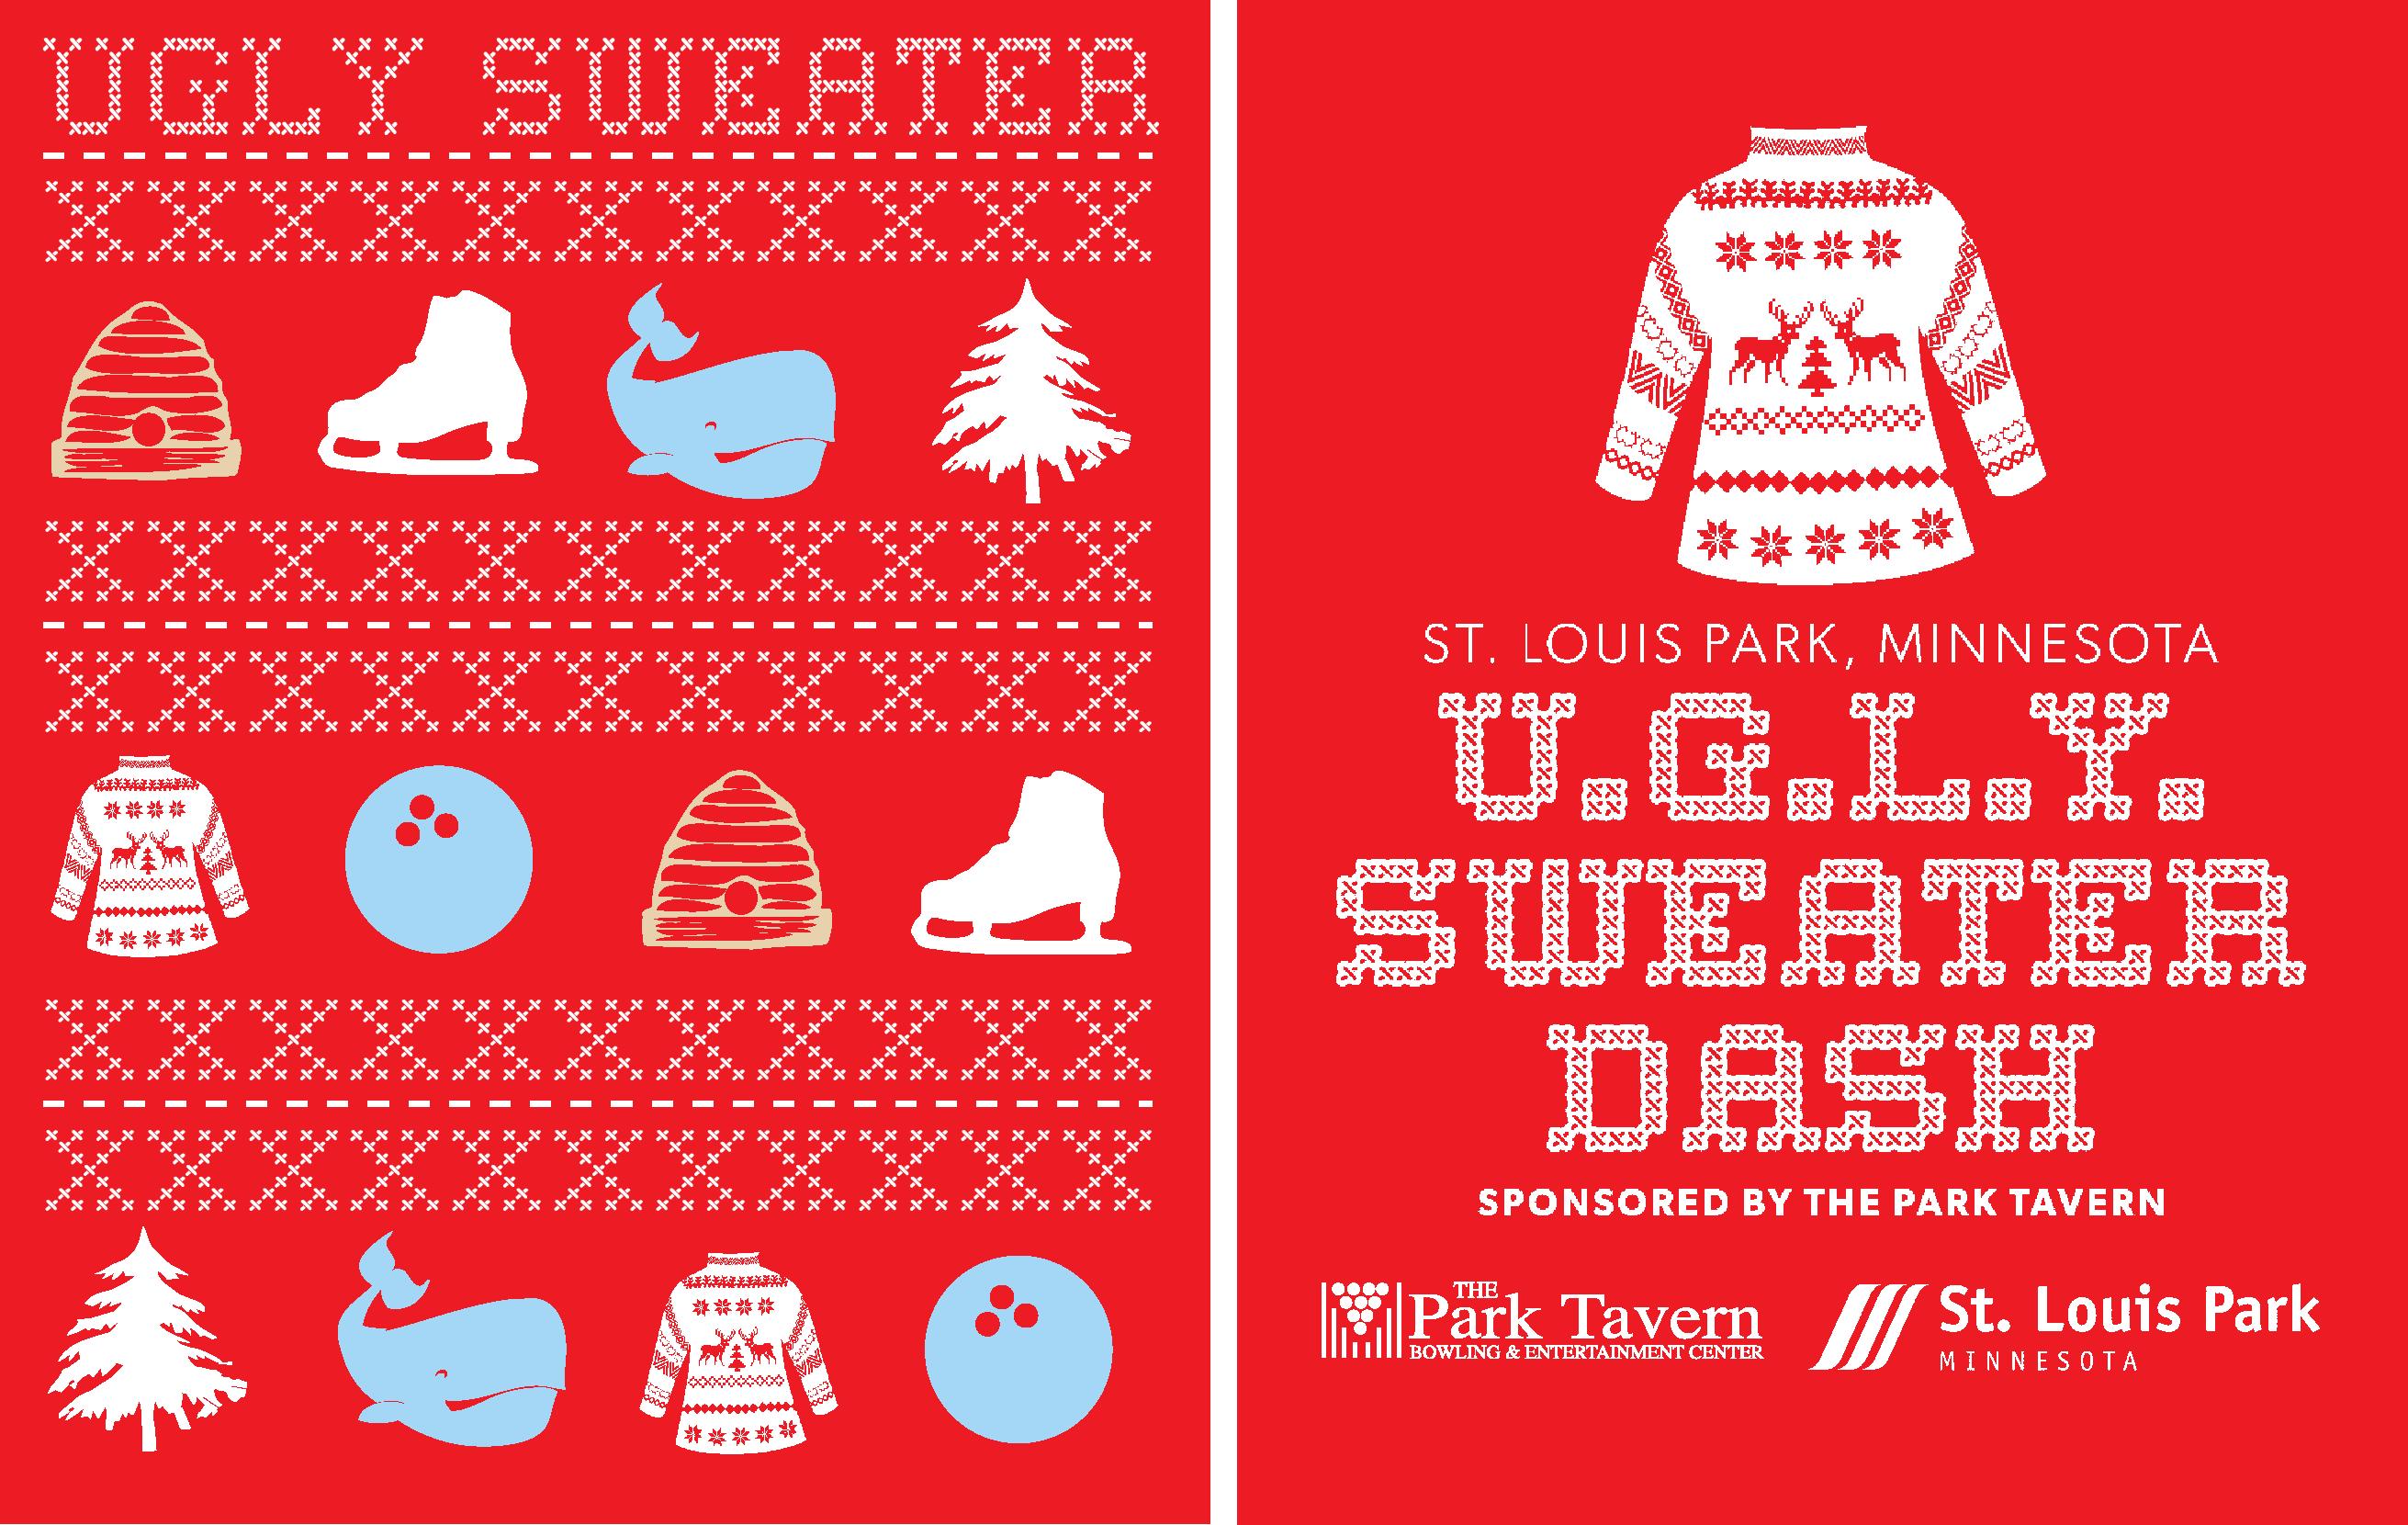 UGLY Sweater Dash 5K - St. Louis Park, MN 2014 | ACTIVE